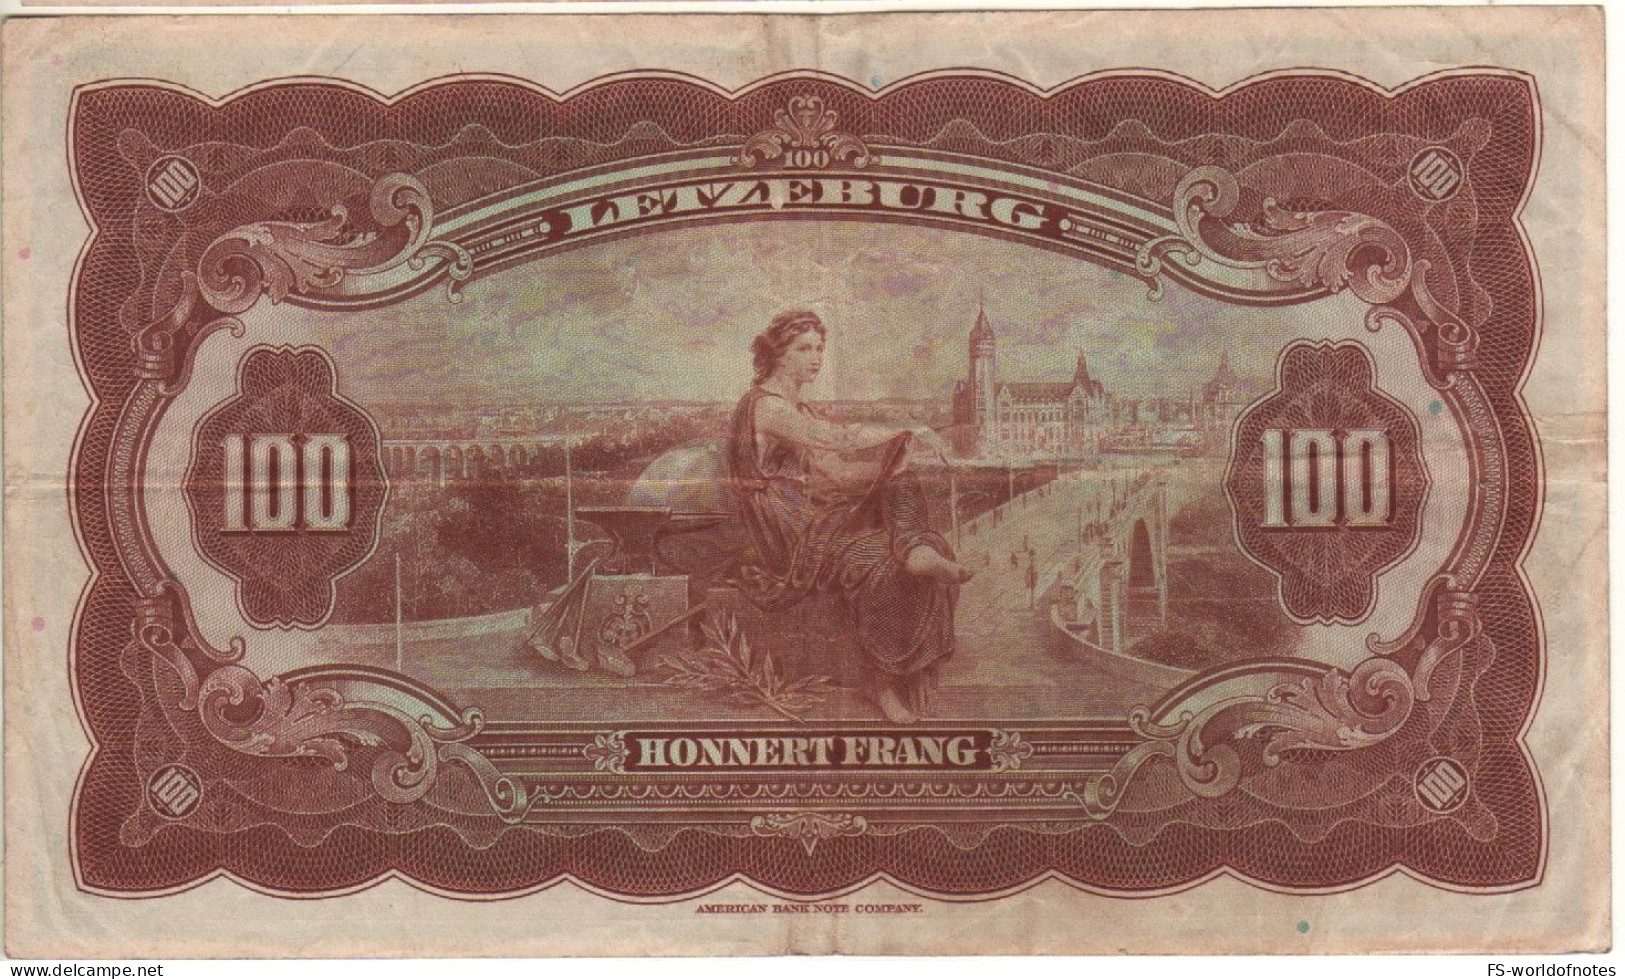 LUXEMBOURG 100 Francs   P47a  1944  (Grand Duchess Charlotte +  Allegorical Woman, Adolphe Bridge, Luxembourg  On Back) - Luxemburgo